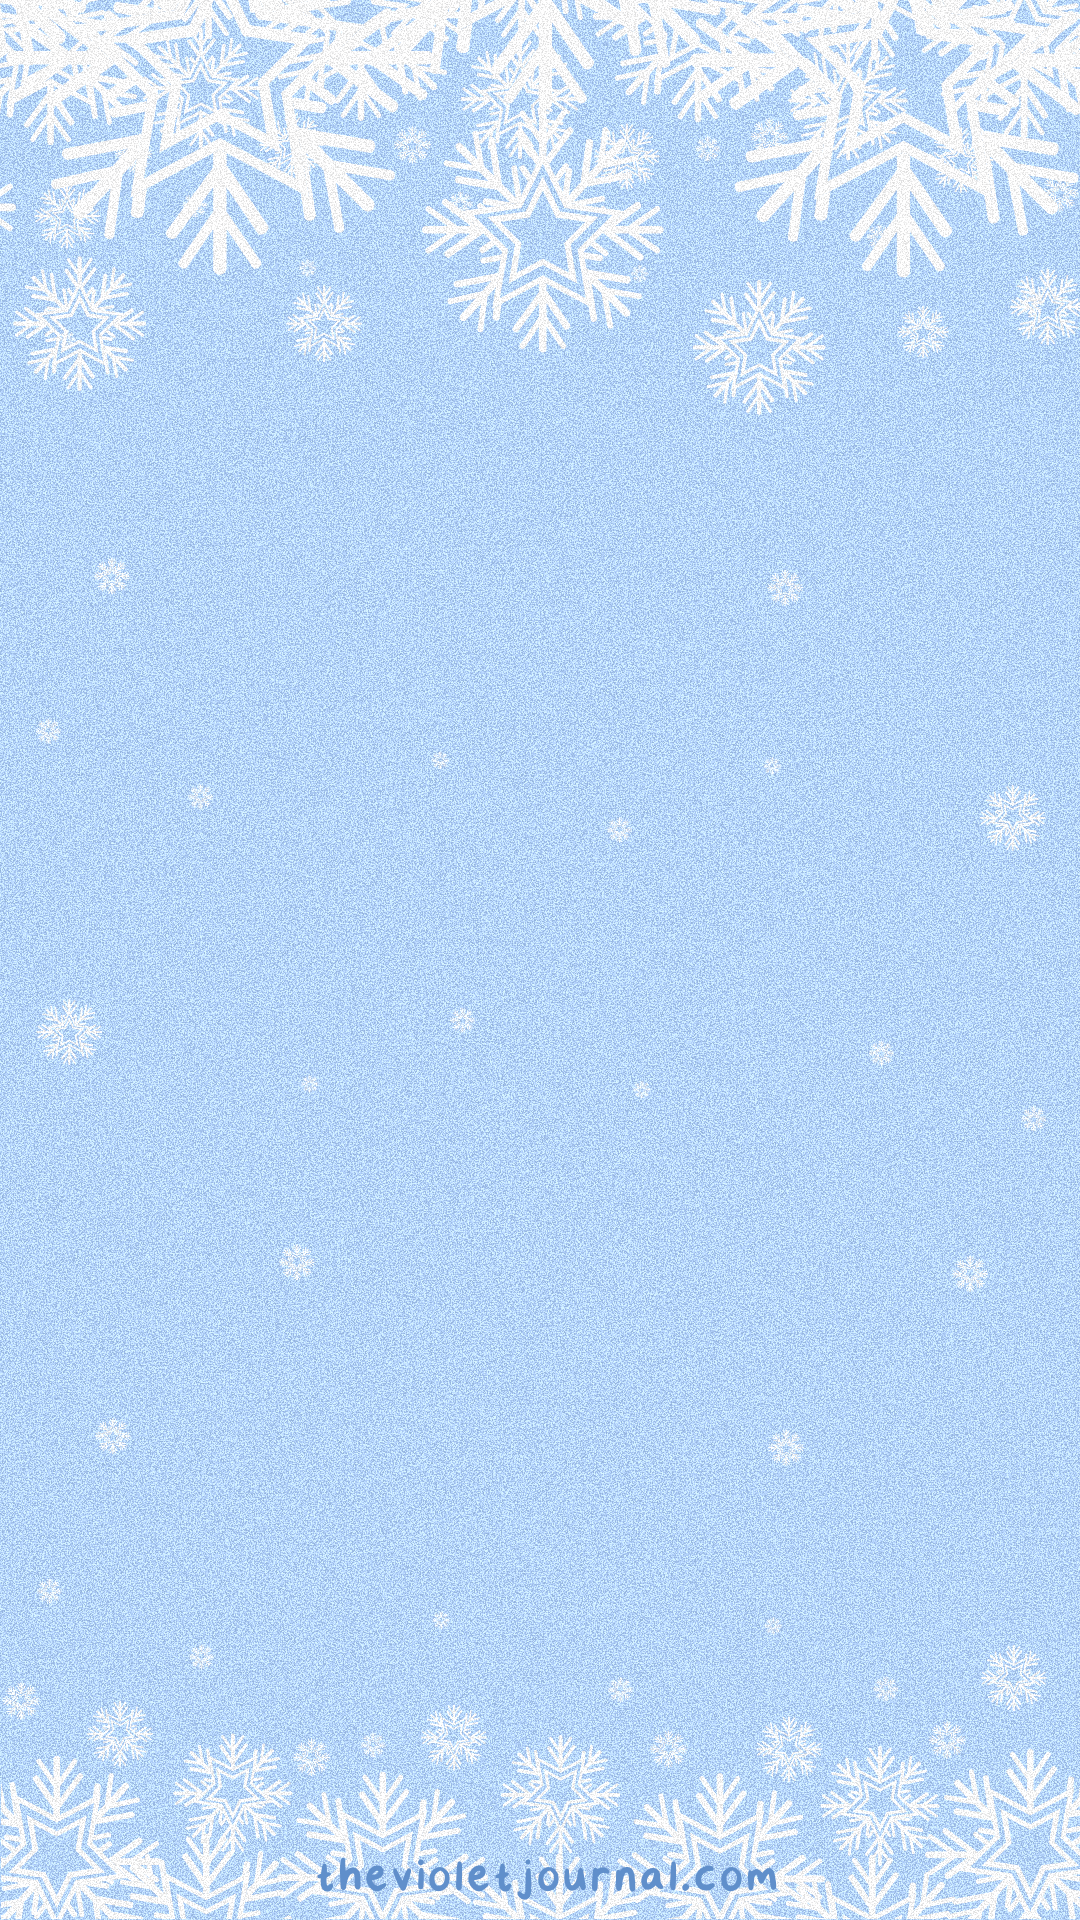 A blue background with white snowflakes as a border at the top and bottom. - Snowflake